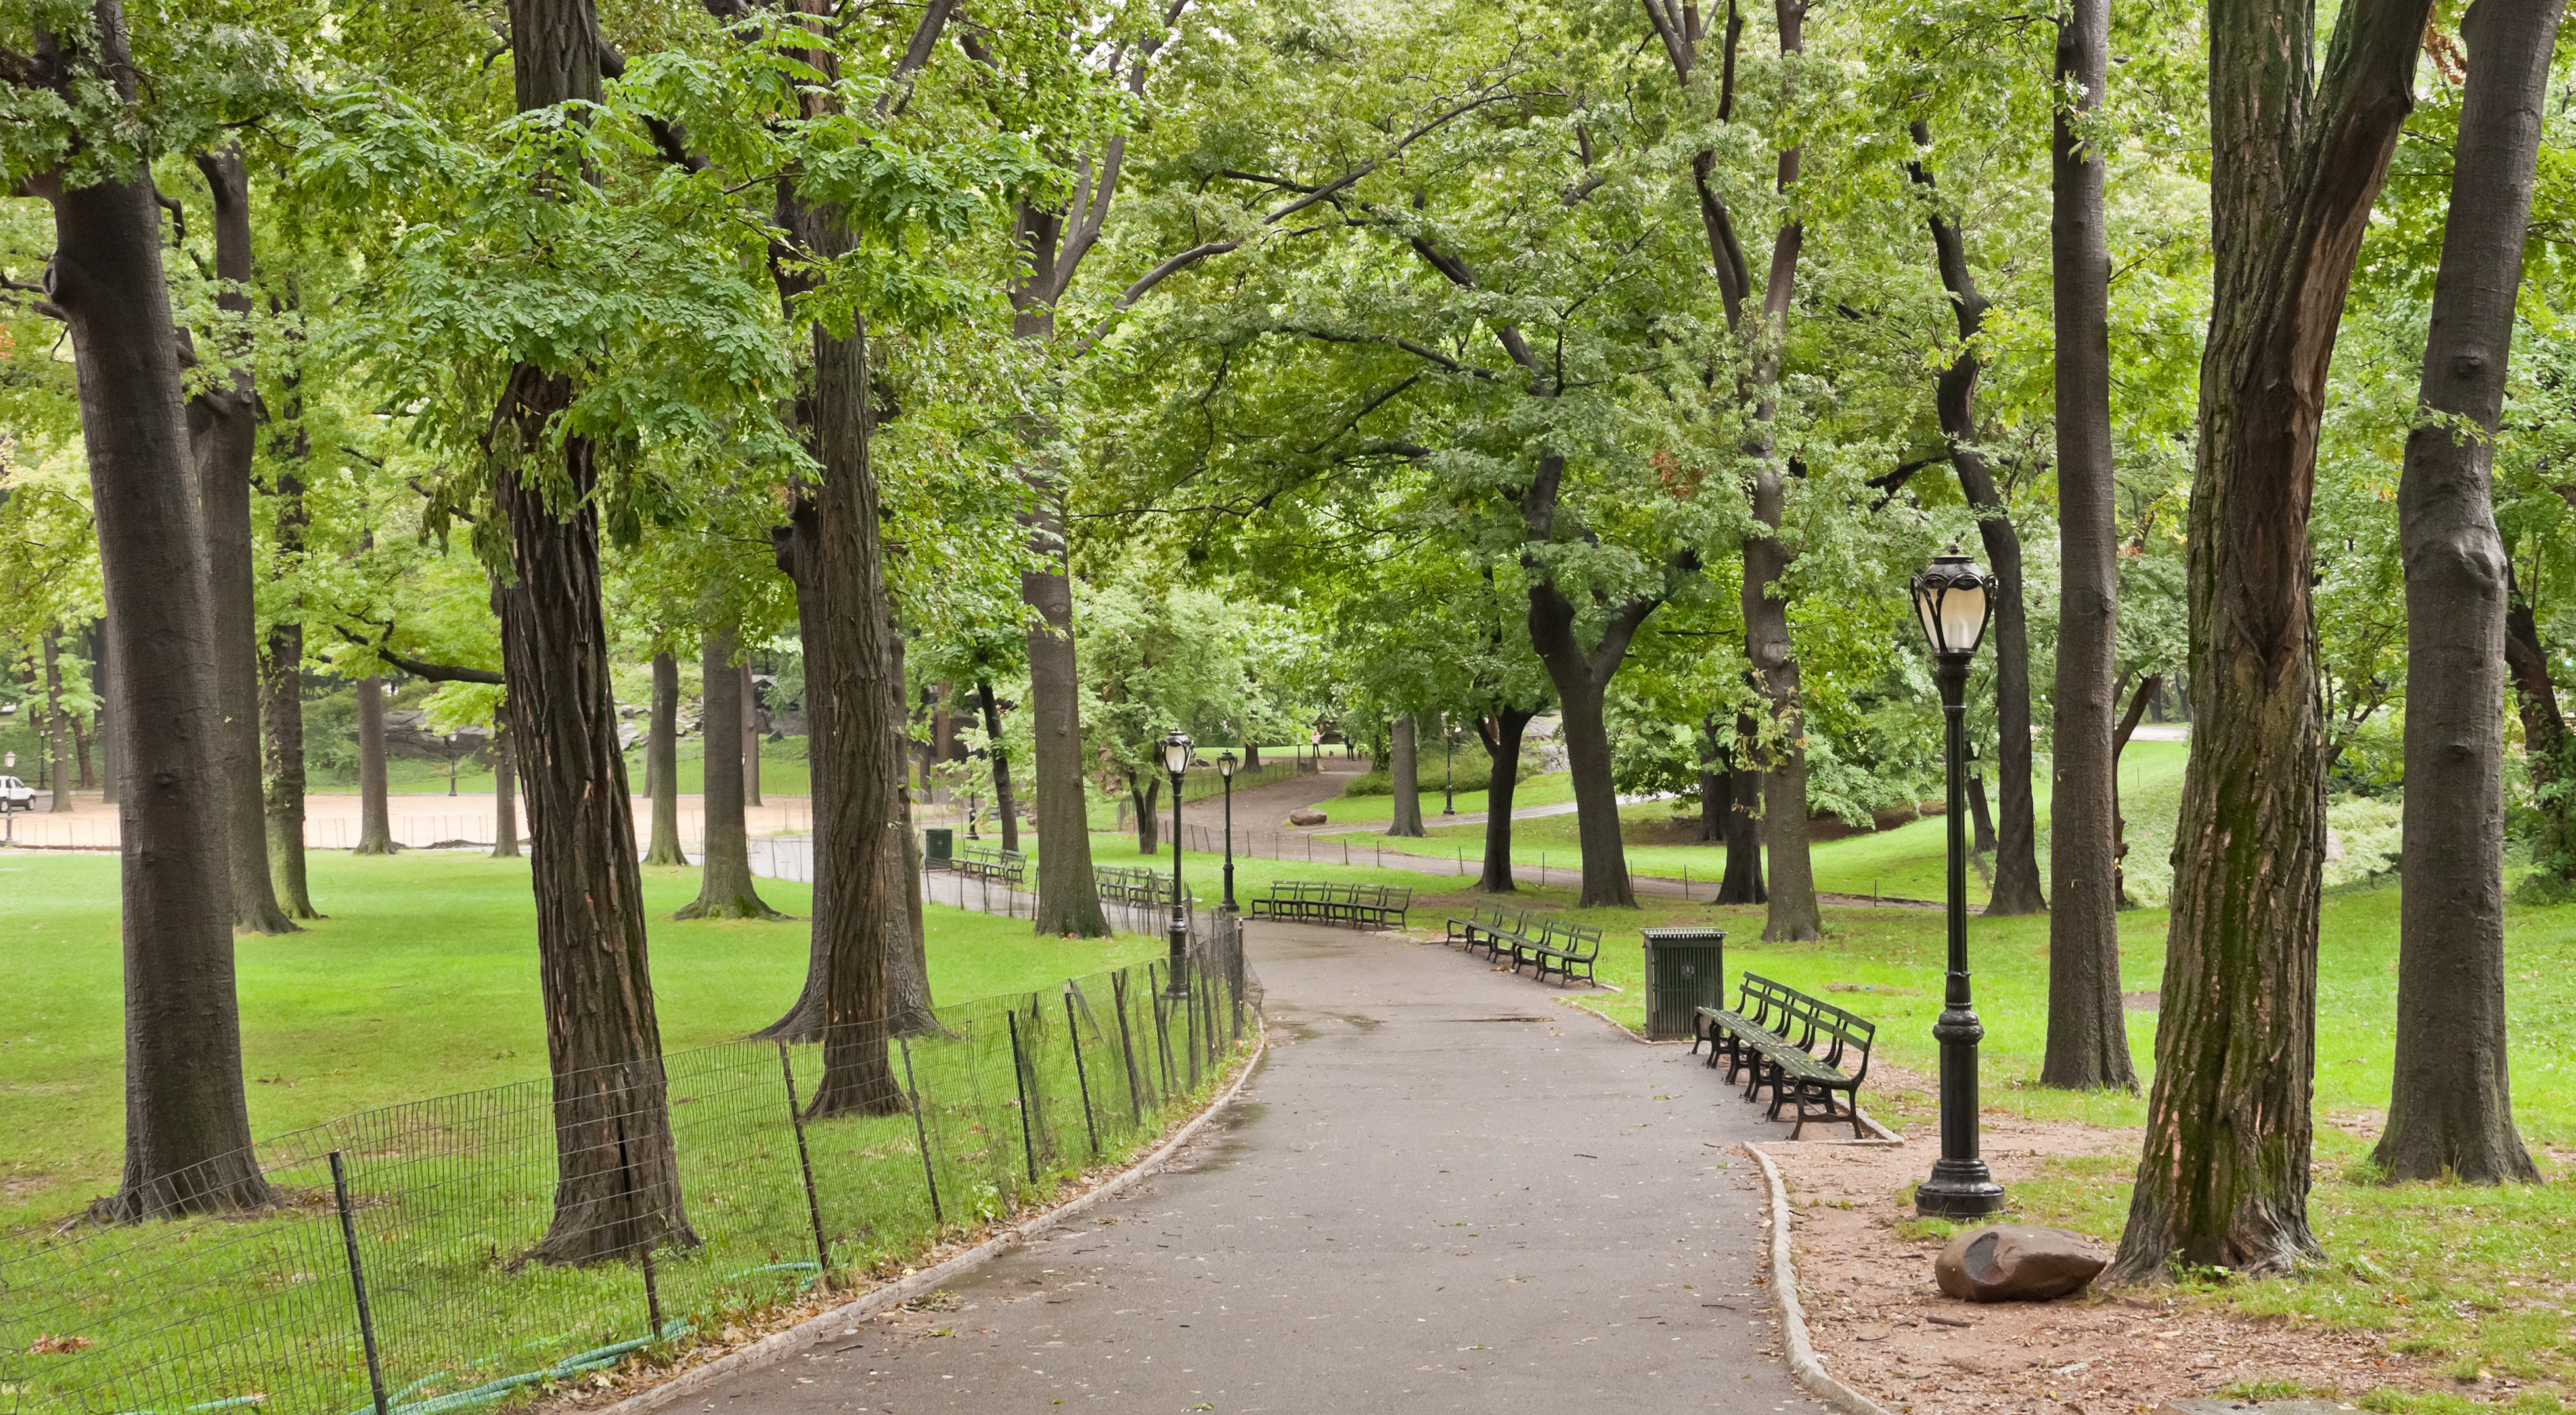 File:Central Park path.jpg - Wikimedia Commons